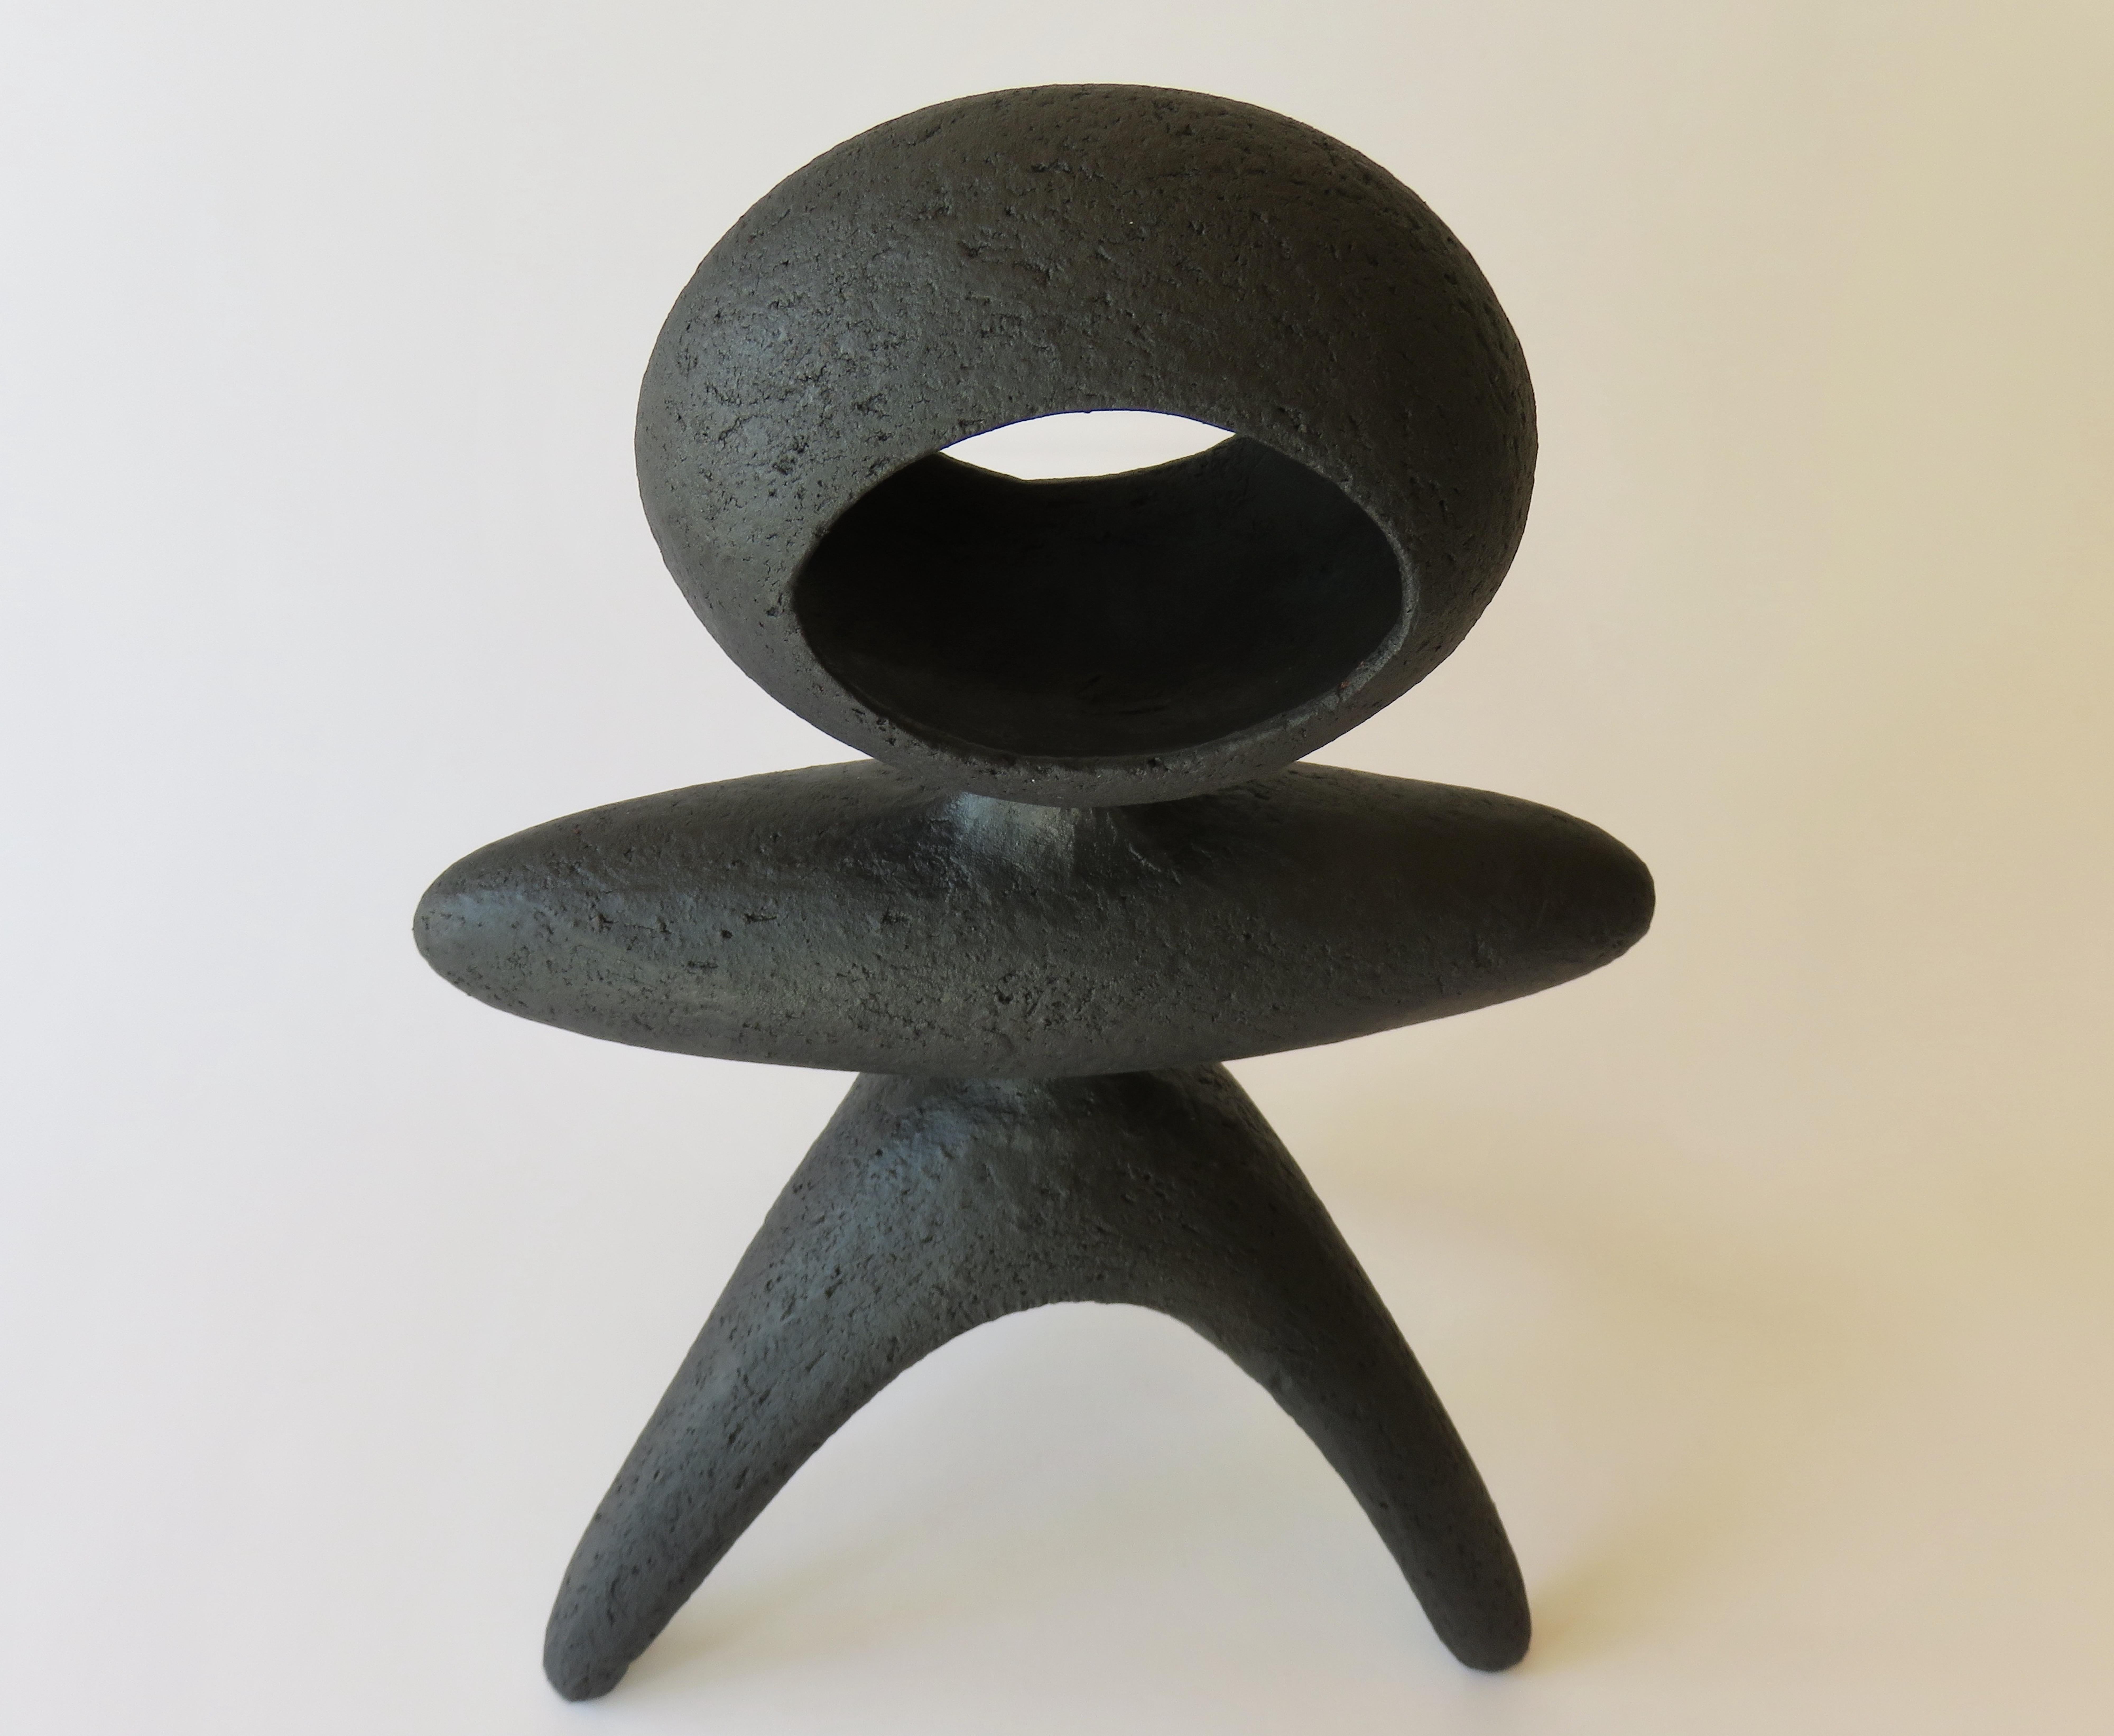 Hand-Crafted Matte Black Modern TOTEM, Open Oval Top on Tripod Legs, Hand Built Ceramic